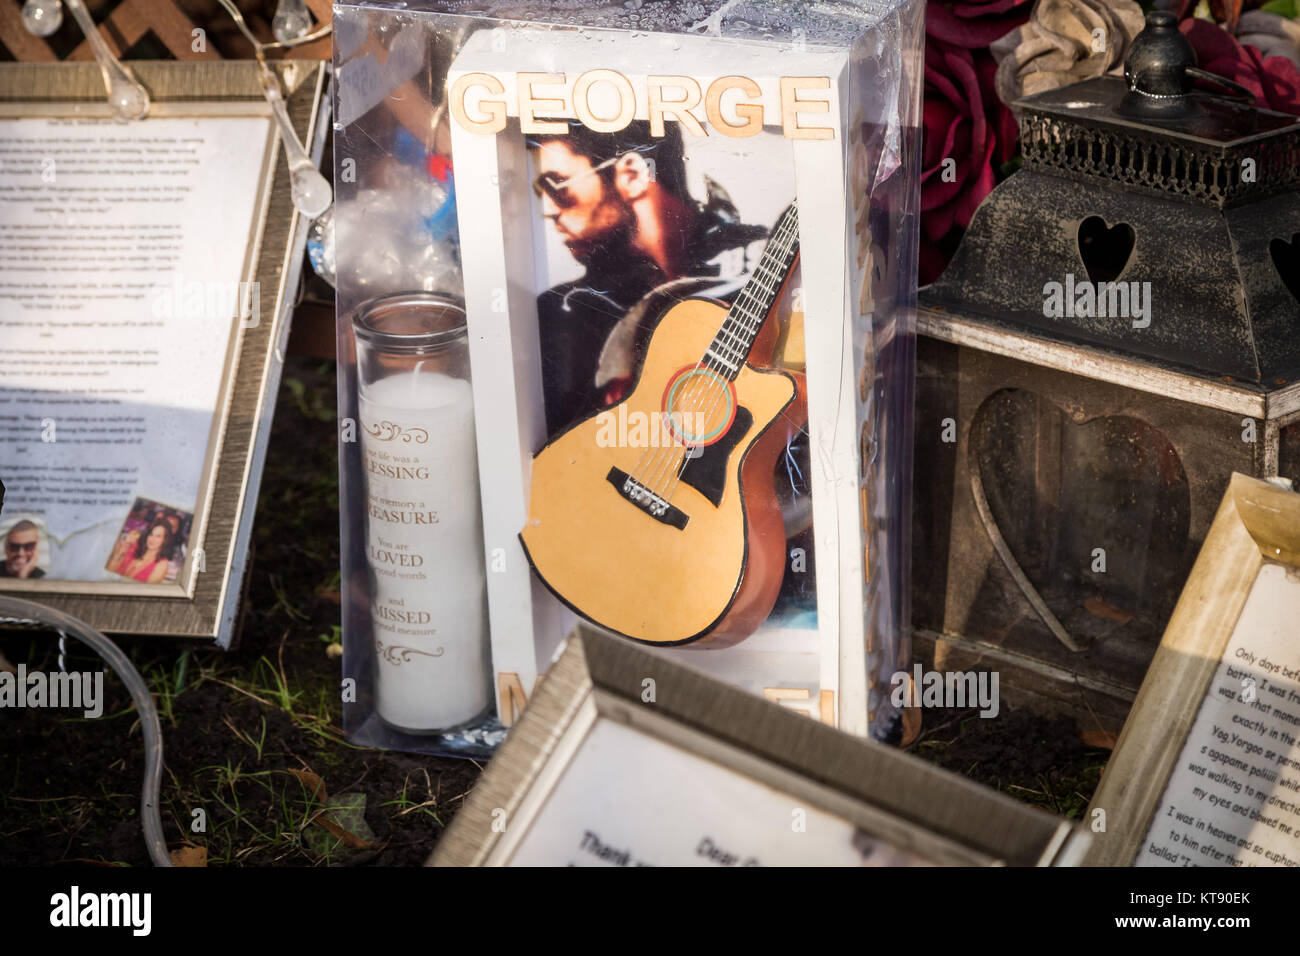 London, UK. 22nd Dec, 2017. George Michael memorial garden. Nearly one year from the singer’s death, the private square that was owned by Michael near his former home in north London is still visited by numerous fans who leave posthumous tributes. Credit: Guy Corbishley/Alamy Live News Stock Photo